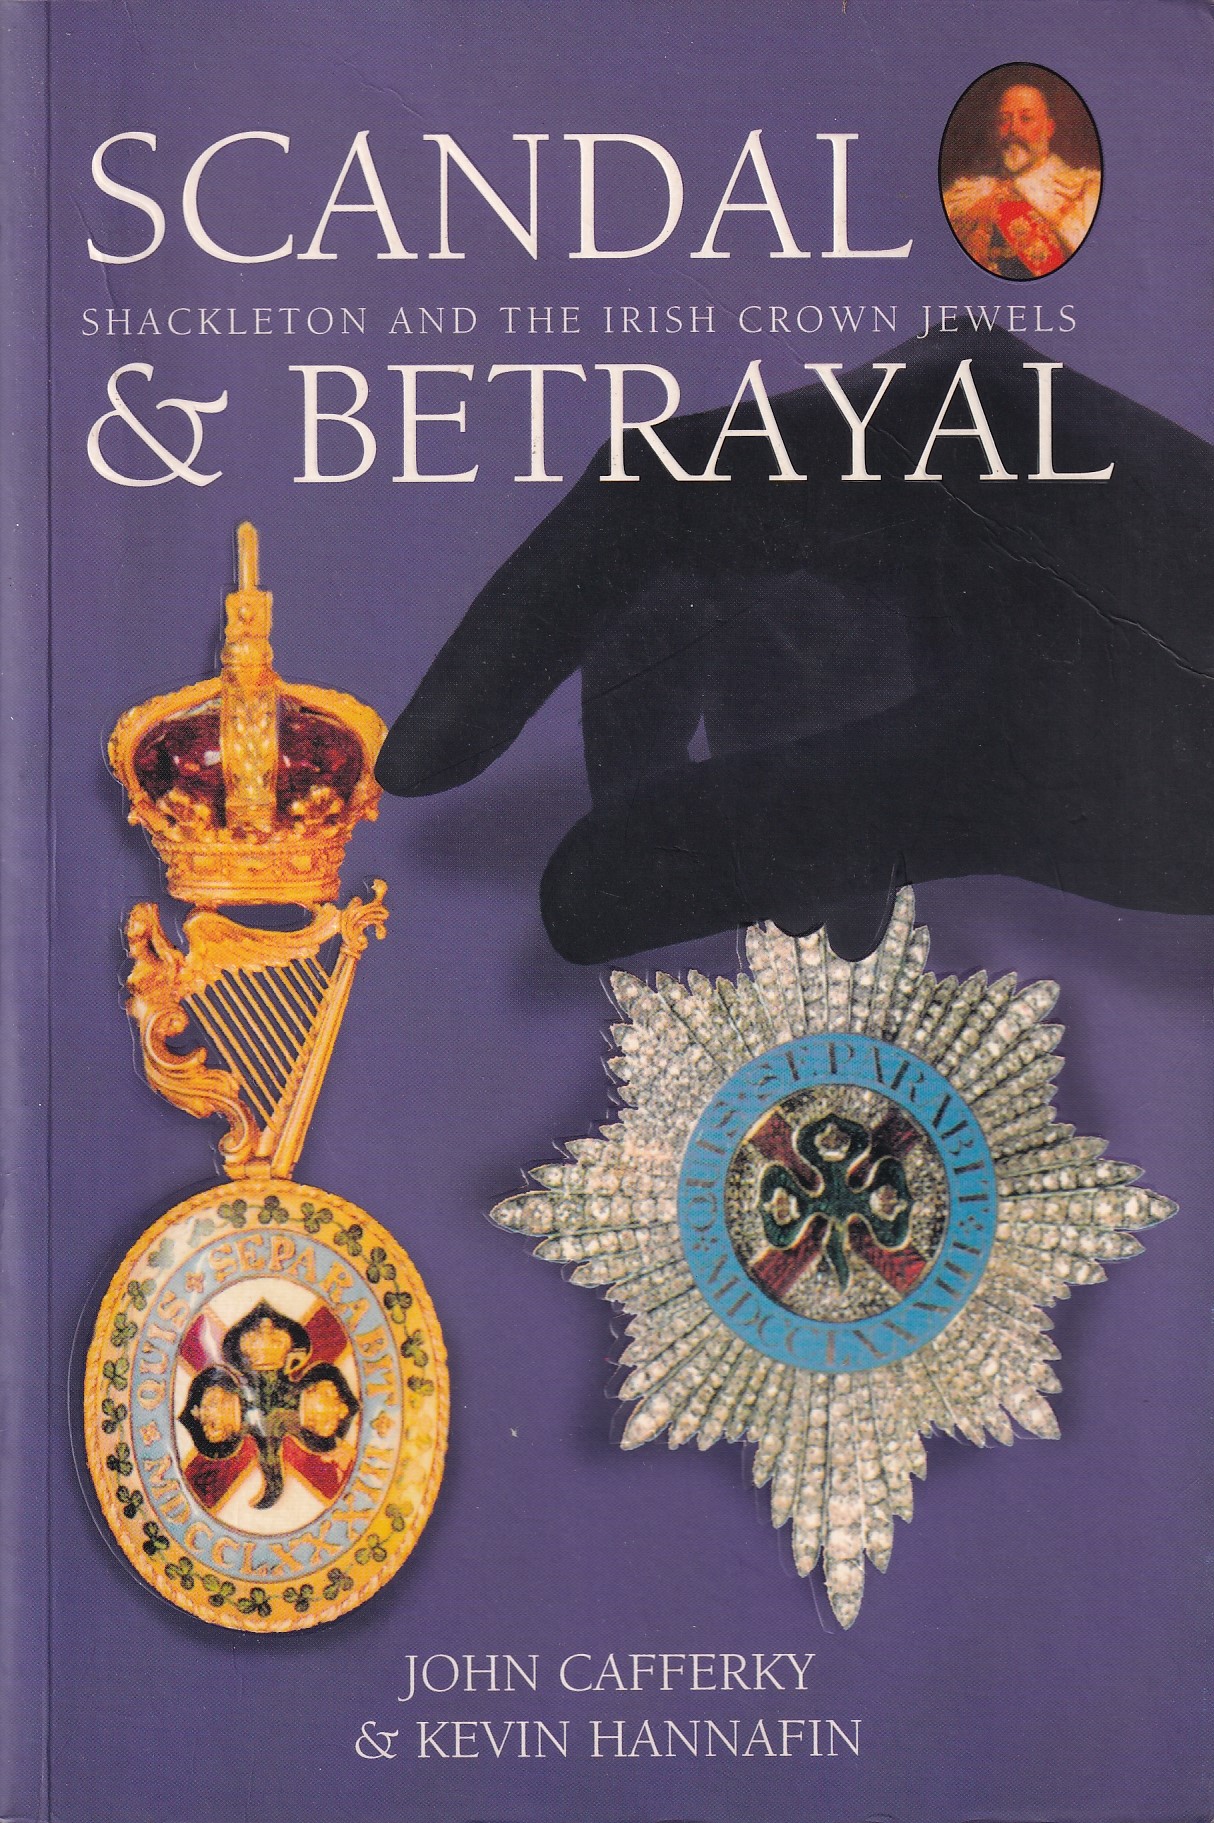 Scandal & Betrayal: Shackleton and the Irish Crown Jewels by John Cafferky & Kevin Hannafin